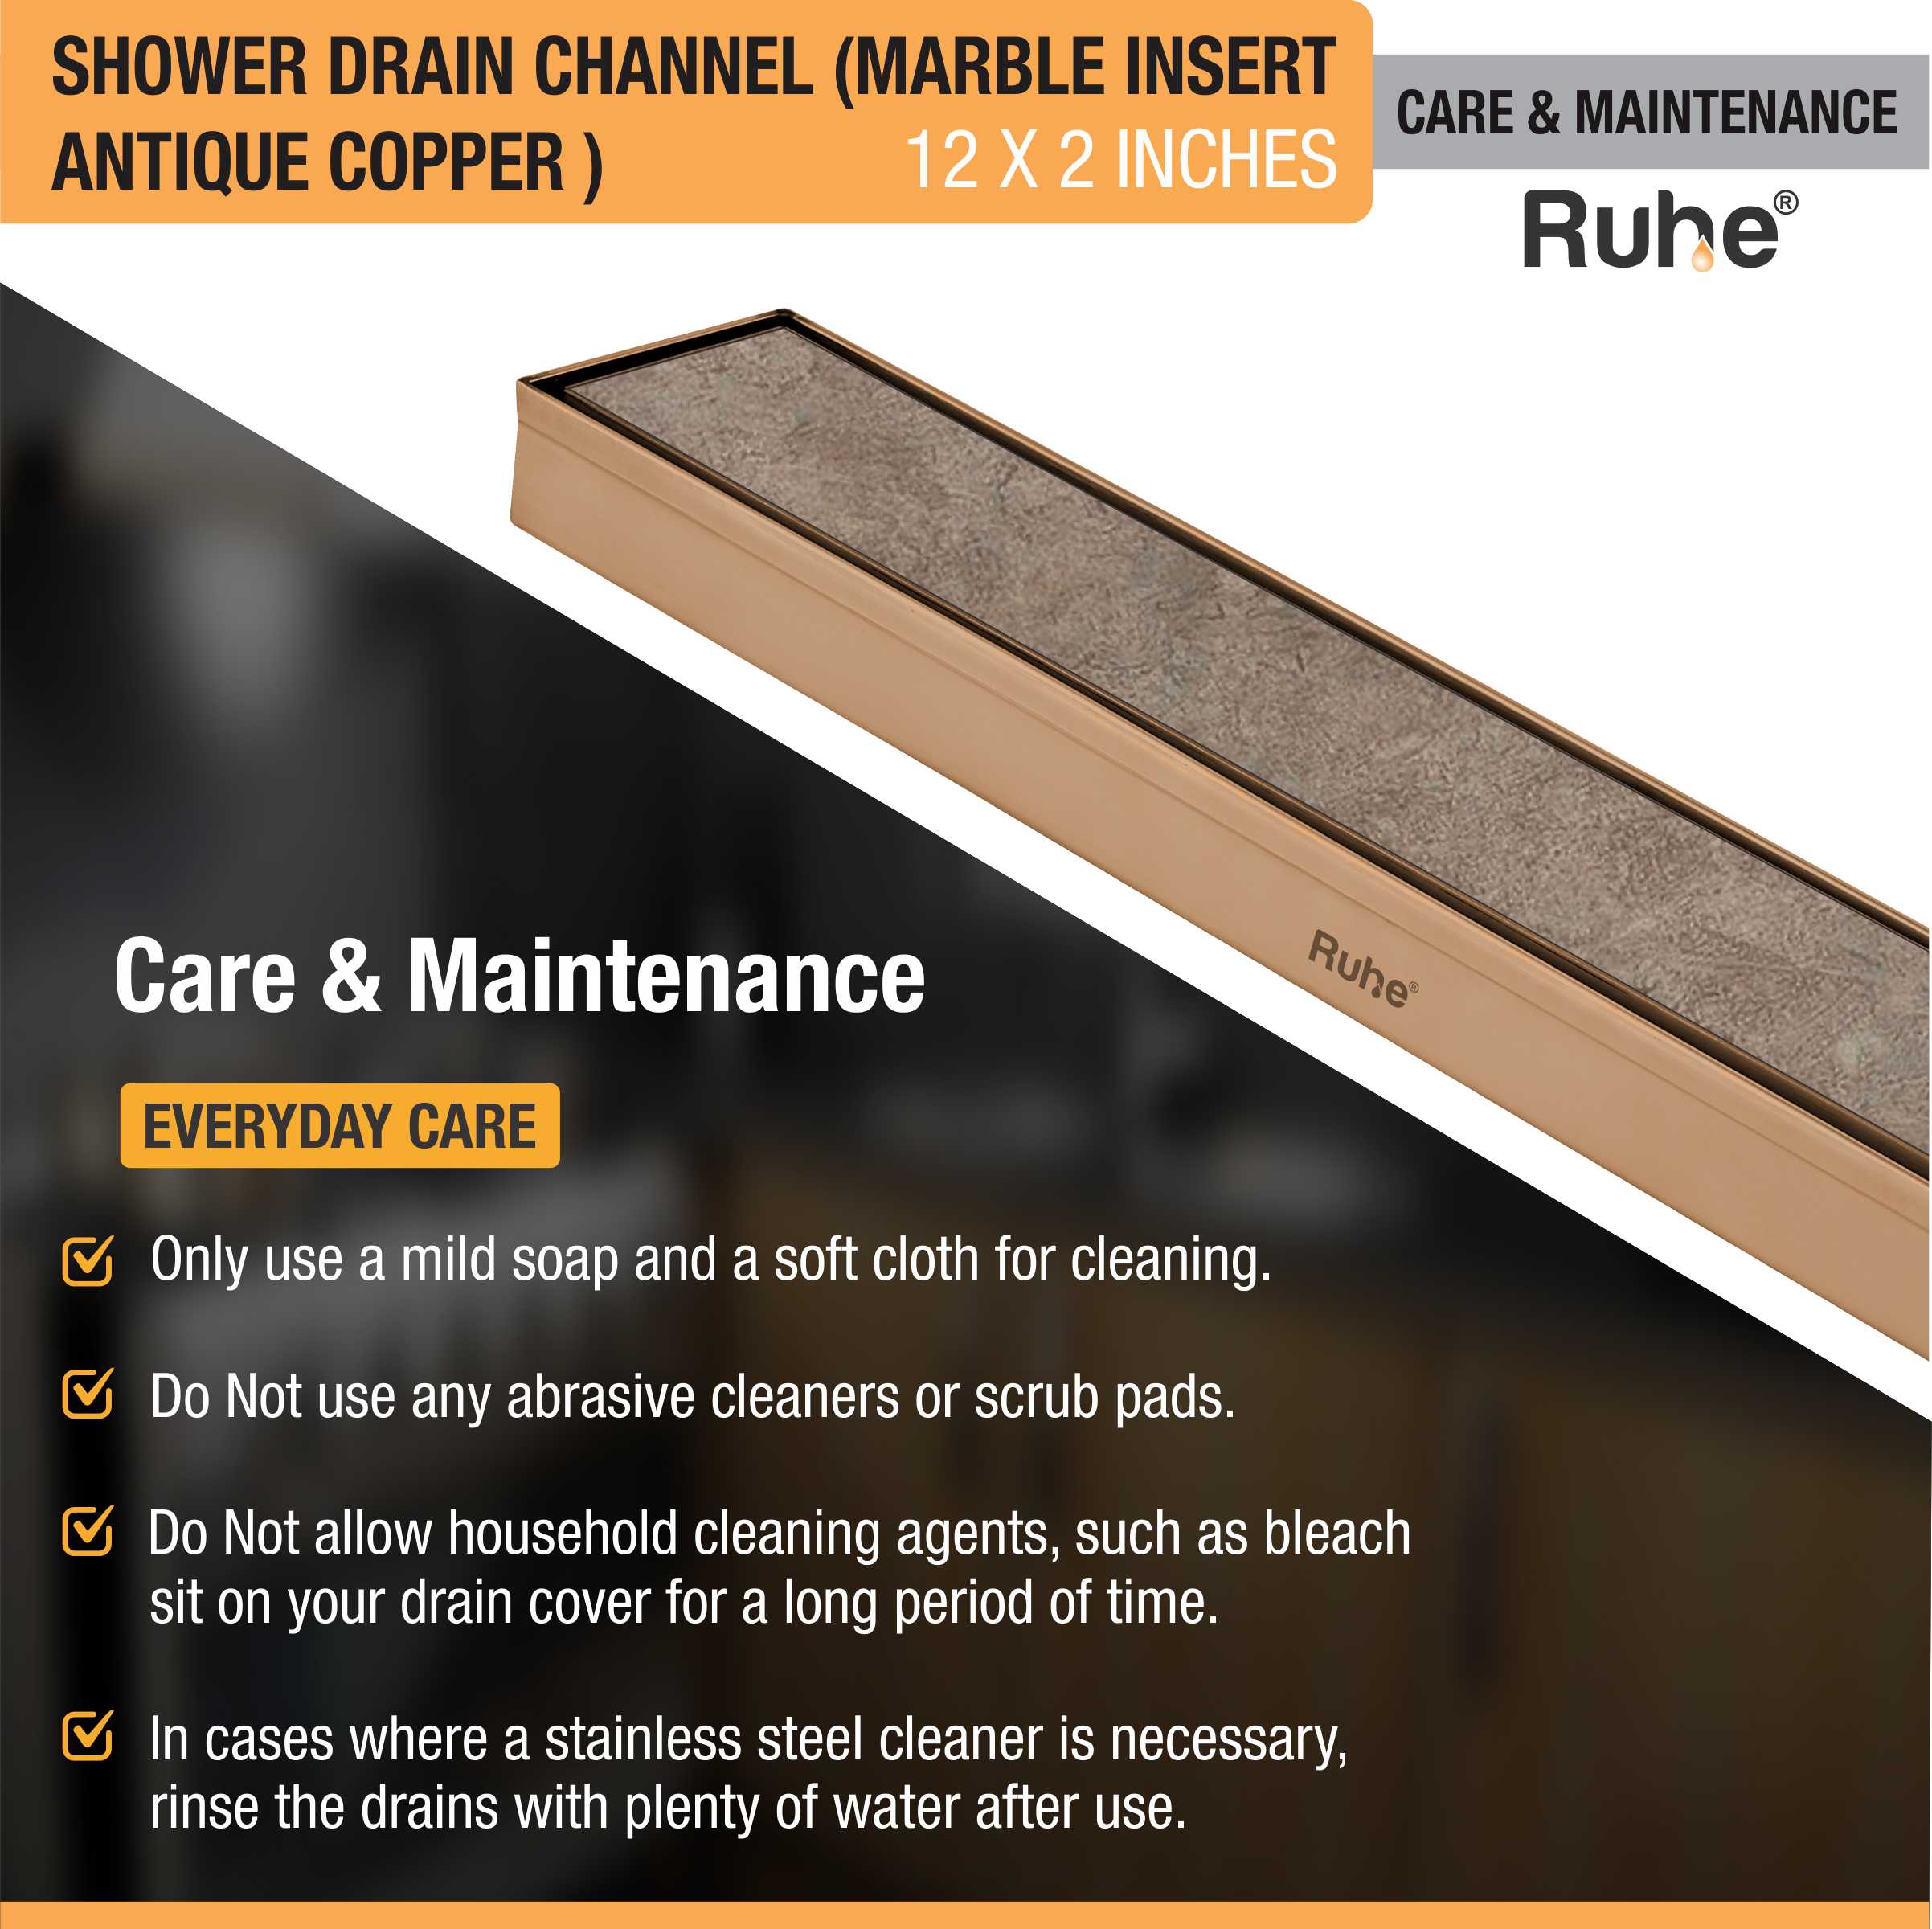 Marble Insert Shower Drain Channel (12 x 2 Inches) ANTIQUE COPPER care and maintenance